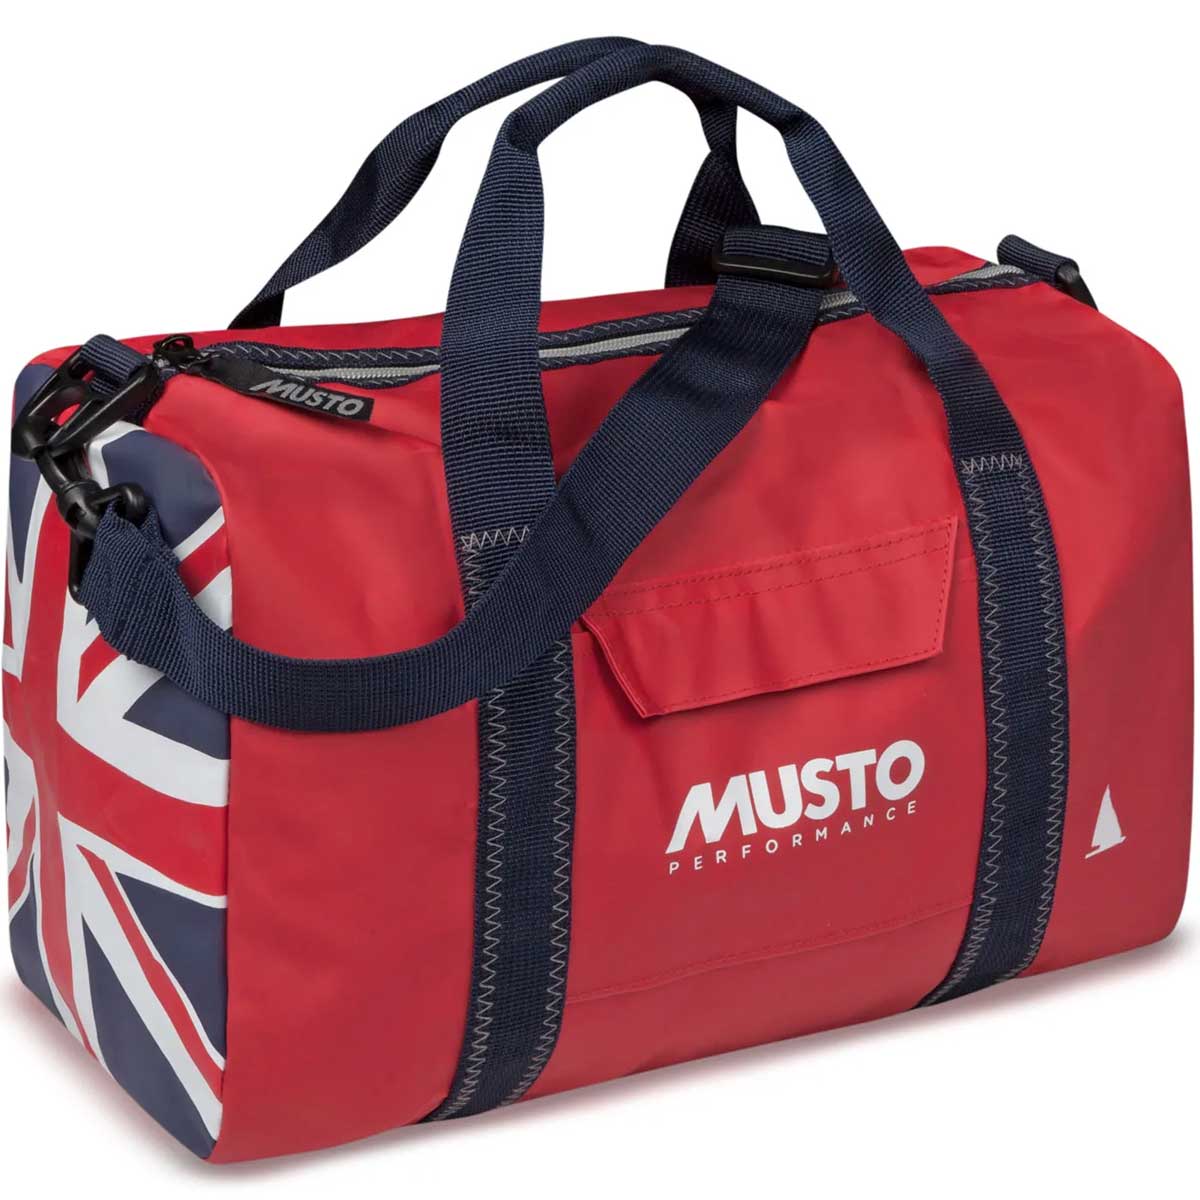 MUSTO Genoa Small Carryall - GBR Red